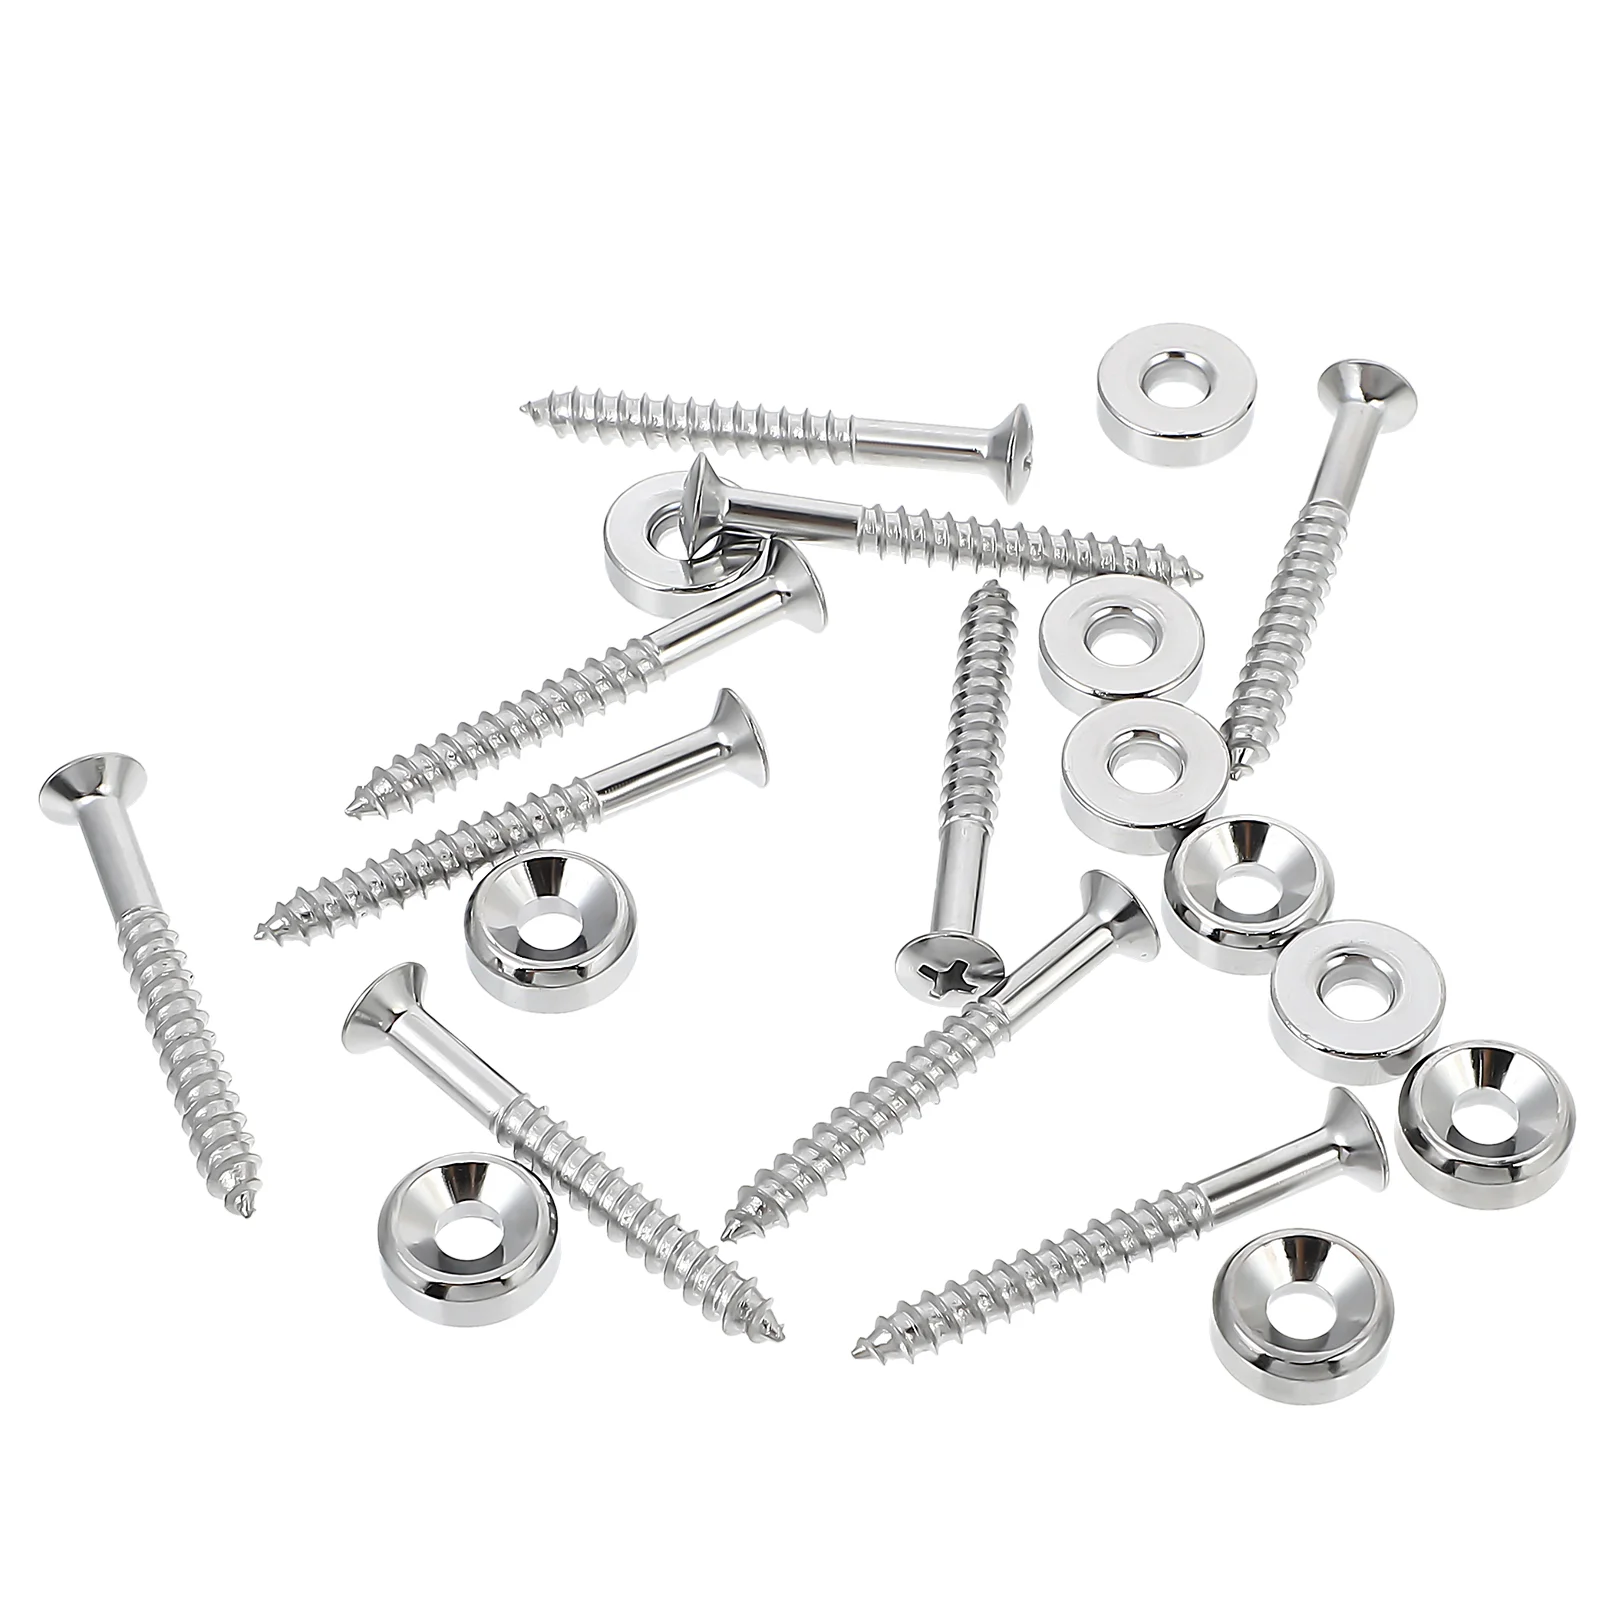 

10 PCS Body Connecting Buckle Bushing Bolt Guitar Neck Plate Bass Joint Screw Headless Electric Ferrule Supply